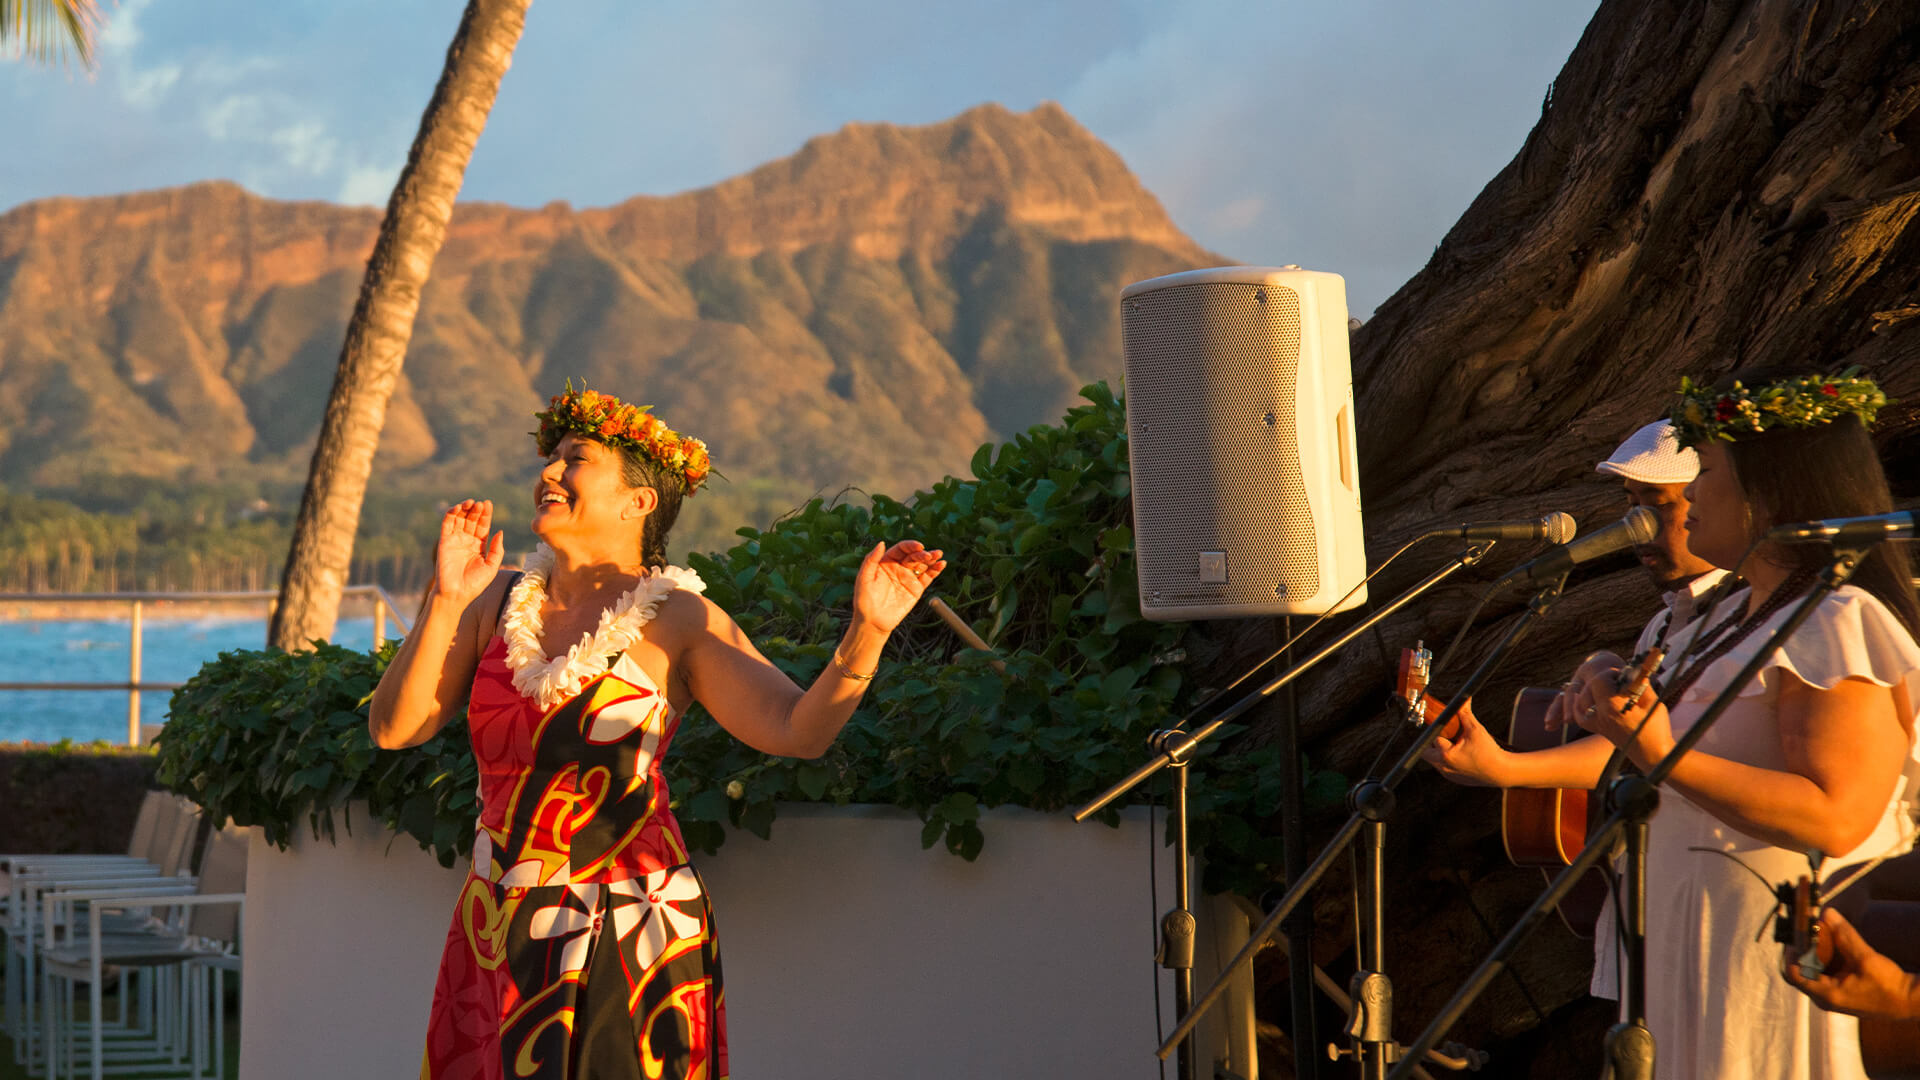 Live entertainment features Hawaiian music and hula